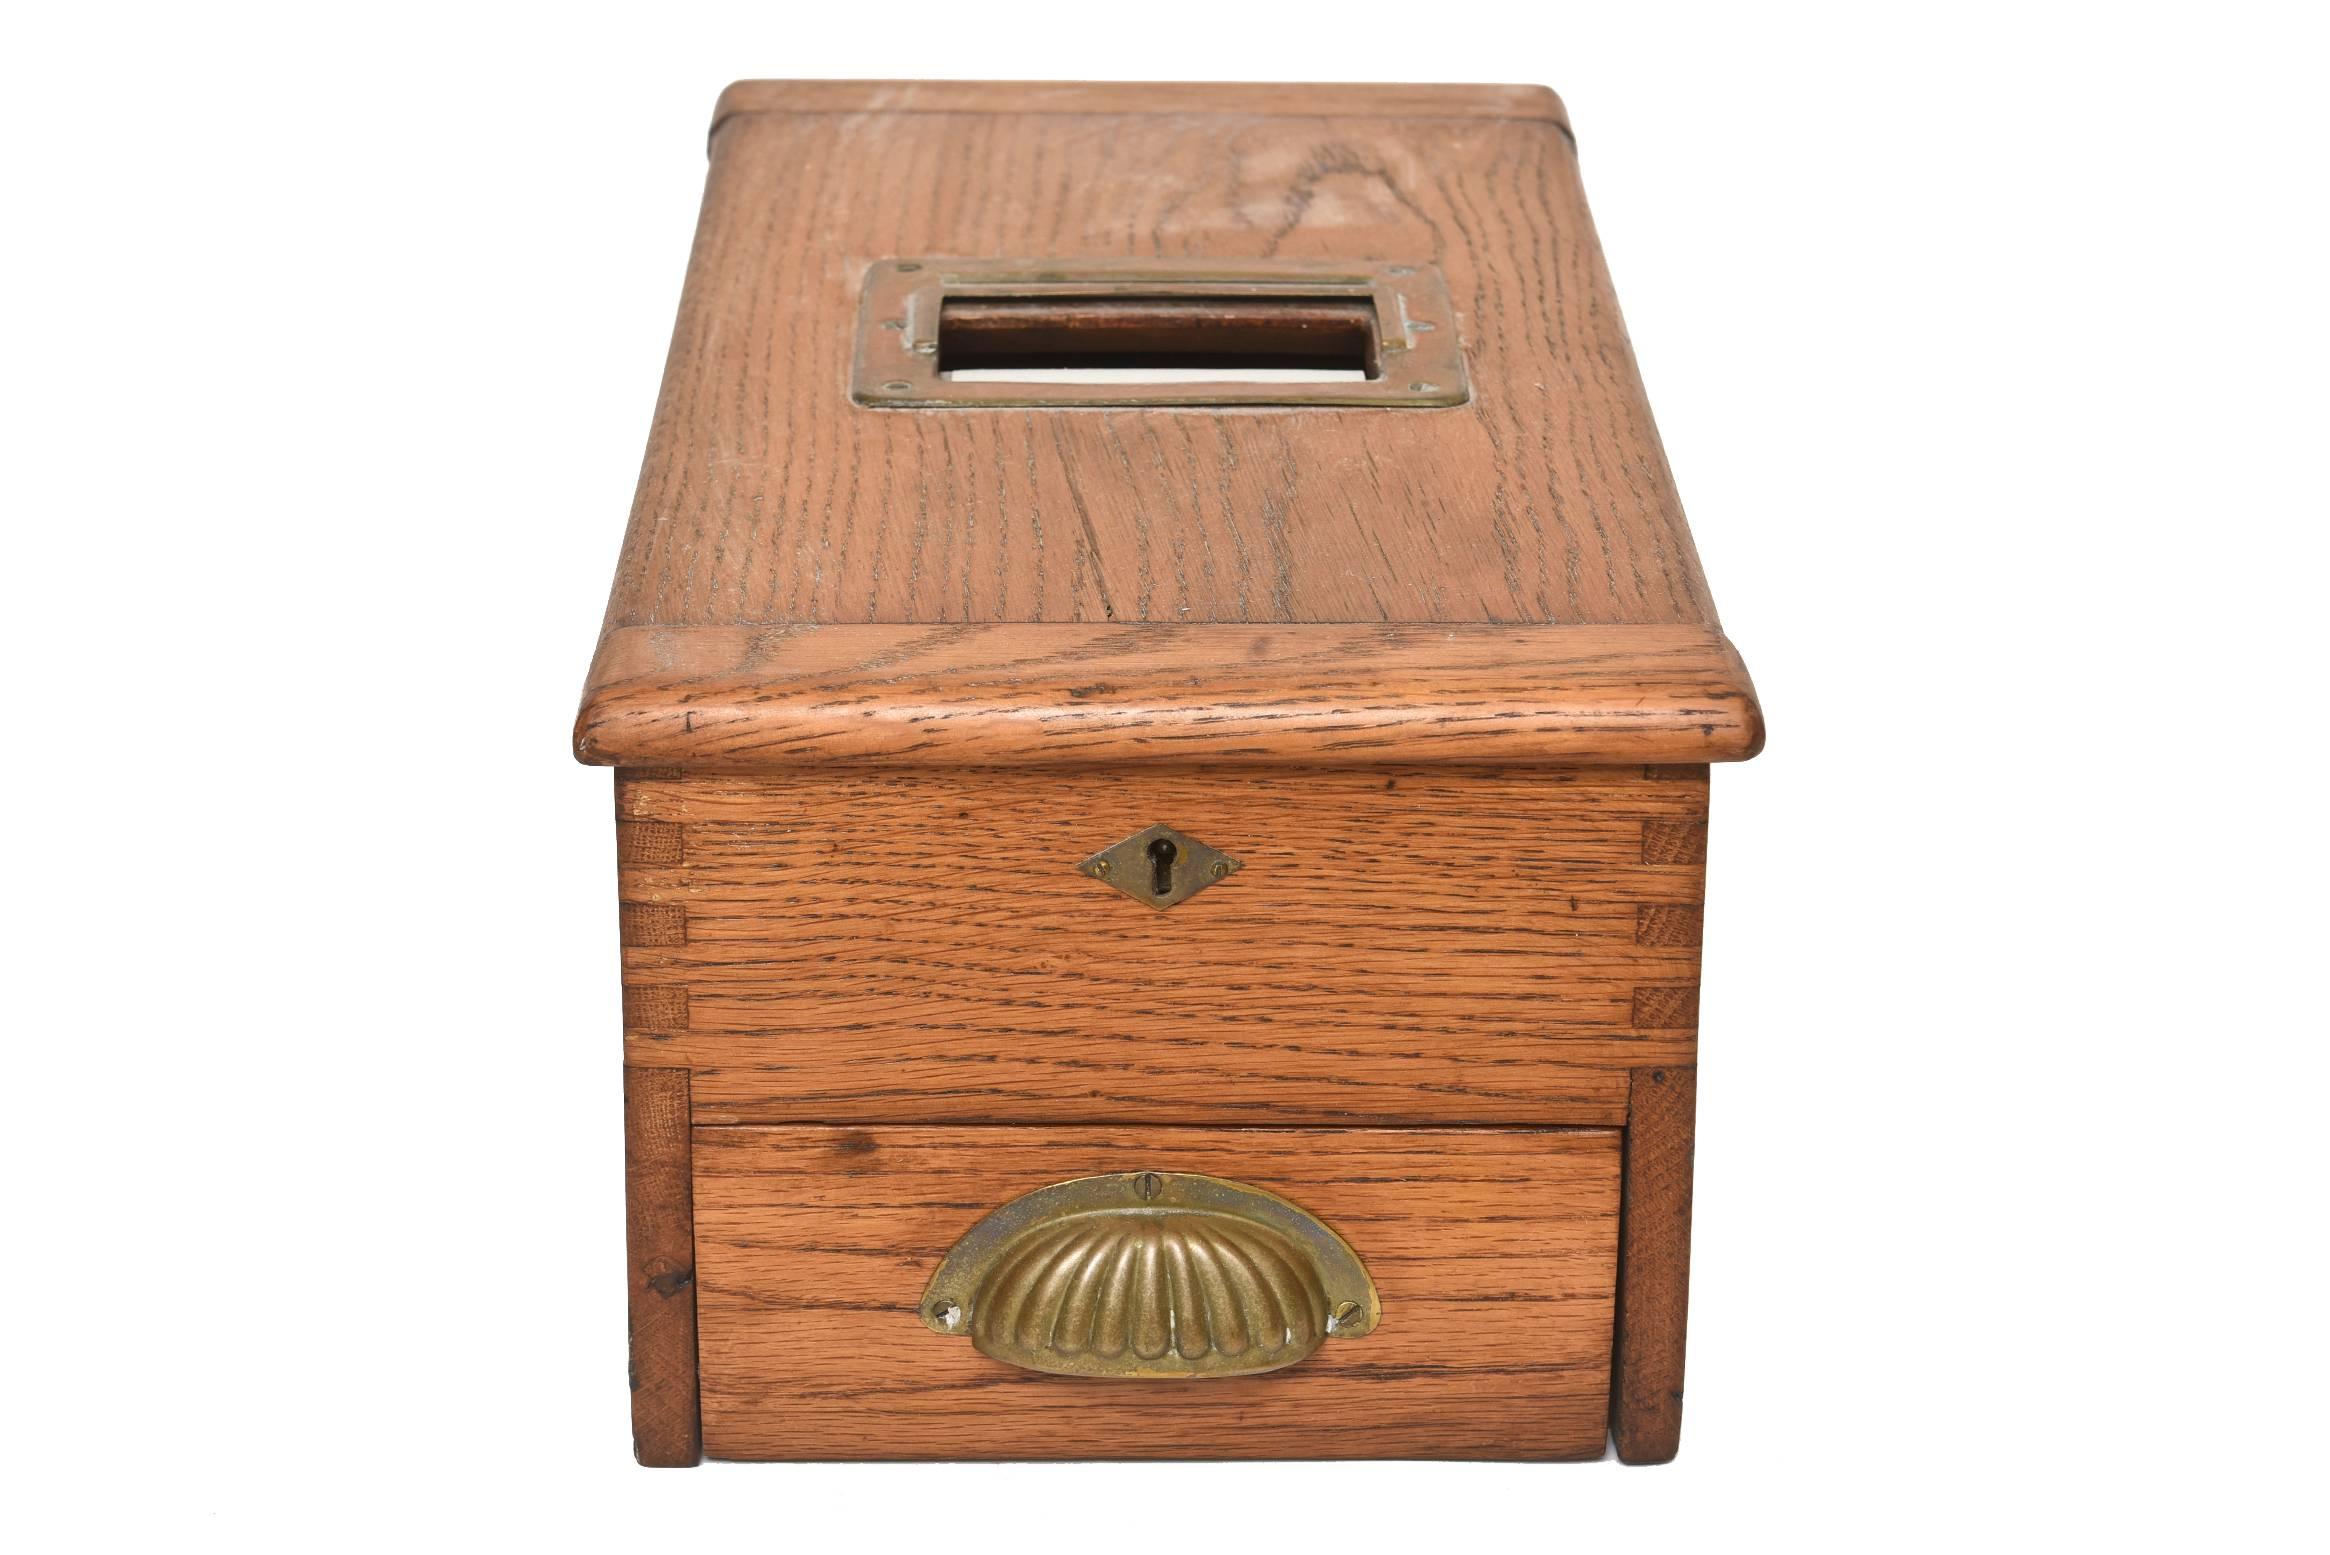 According to the client who had this box it was a Victorian ballot box.  Although with further research I believe it is probably a cash register till drawer.   

This Victorian box is an excellent example of a mid-19th century Wooden box with brass